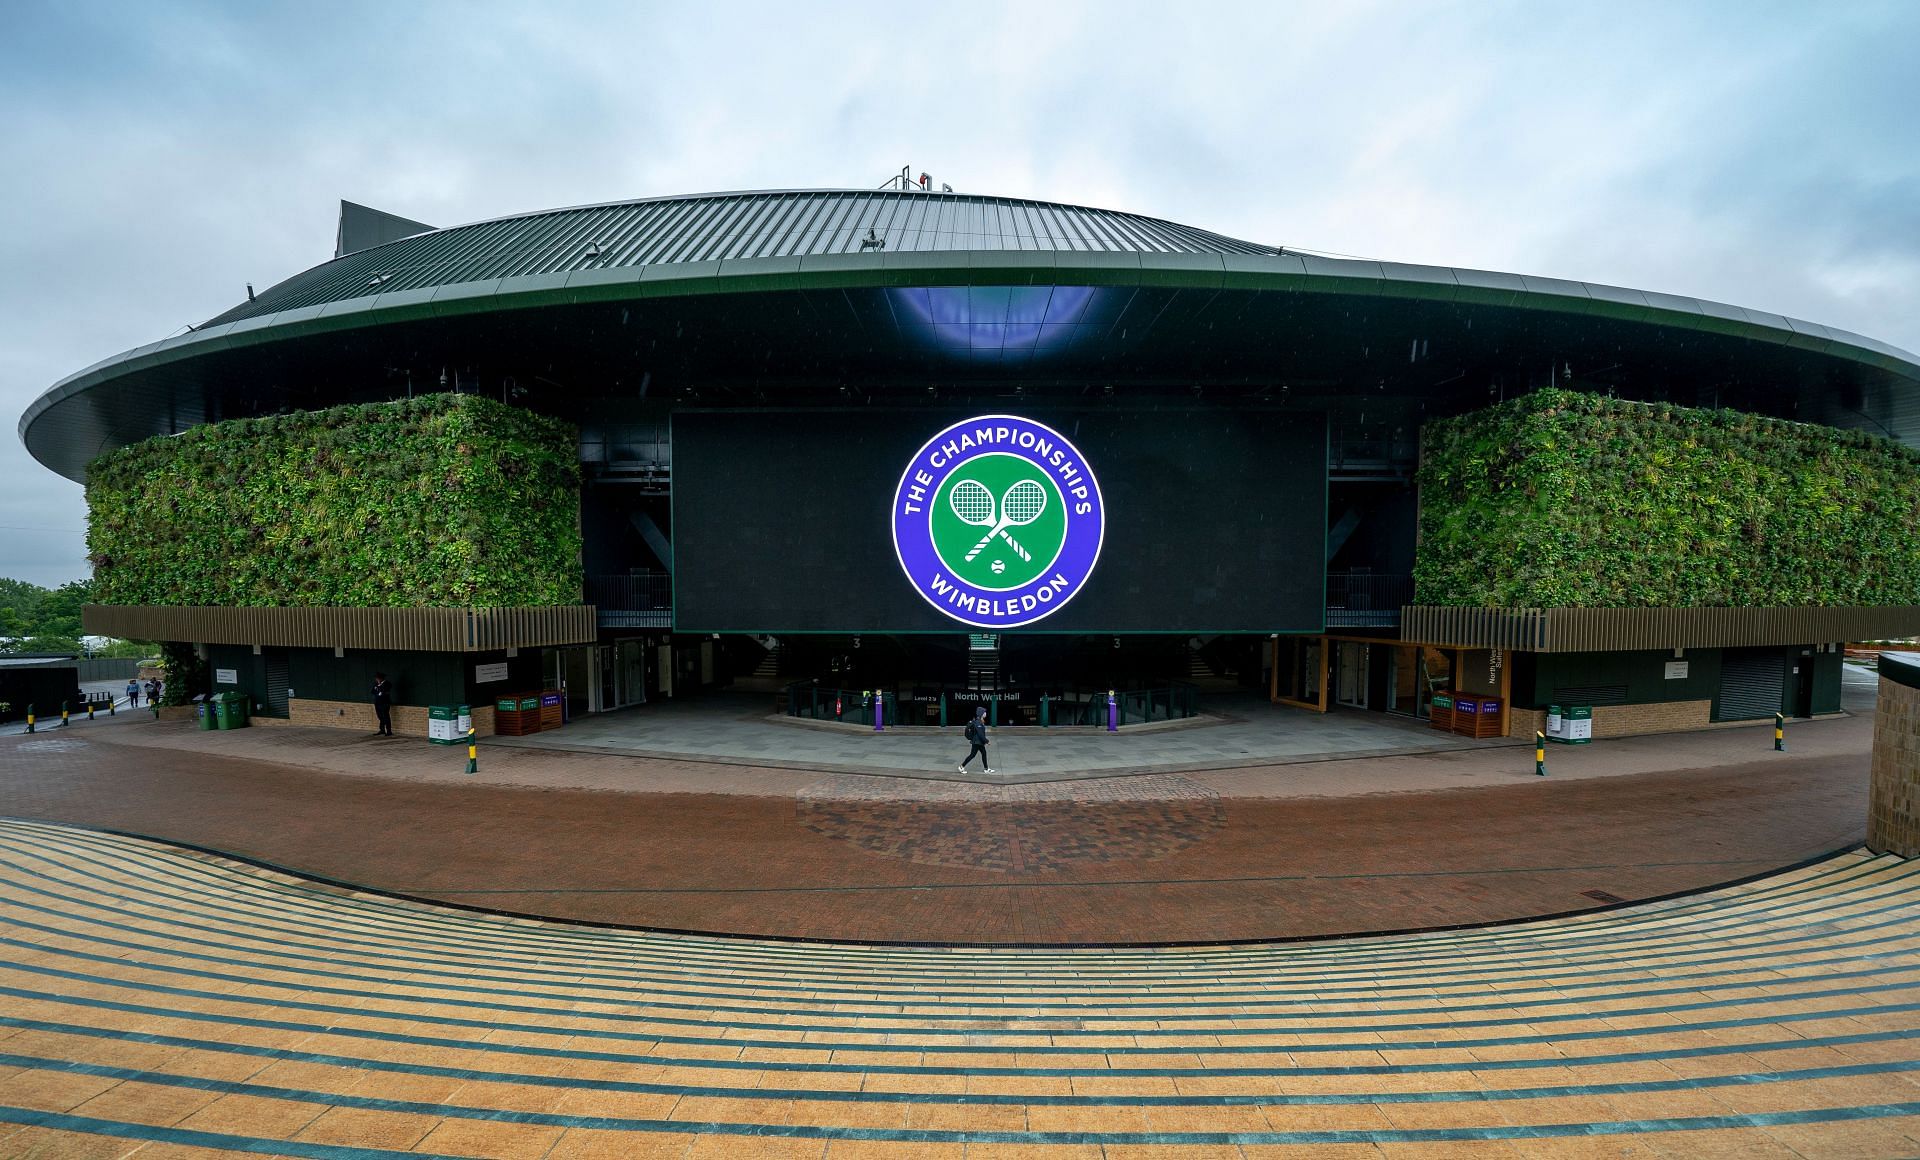 The stage is set for the top pros to battle it out at the 2022 Wimbledon Championships